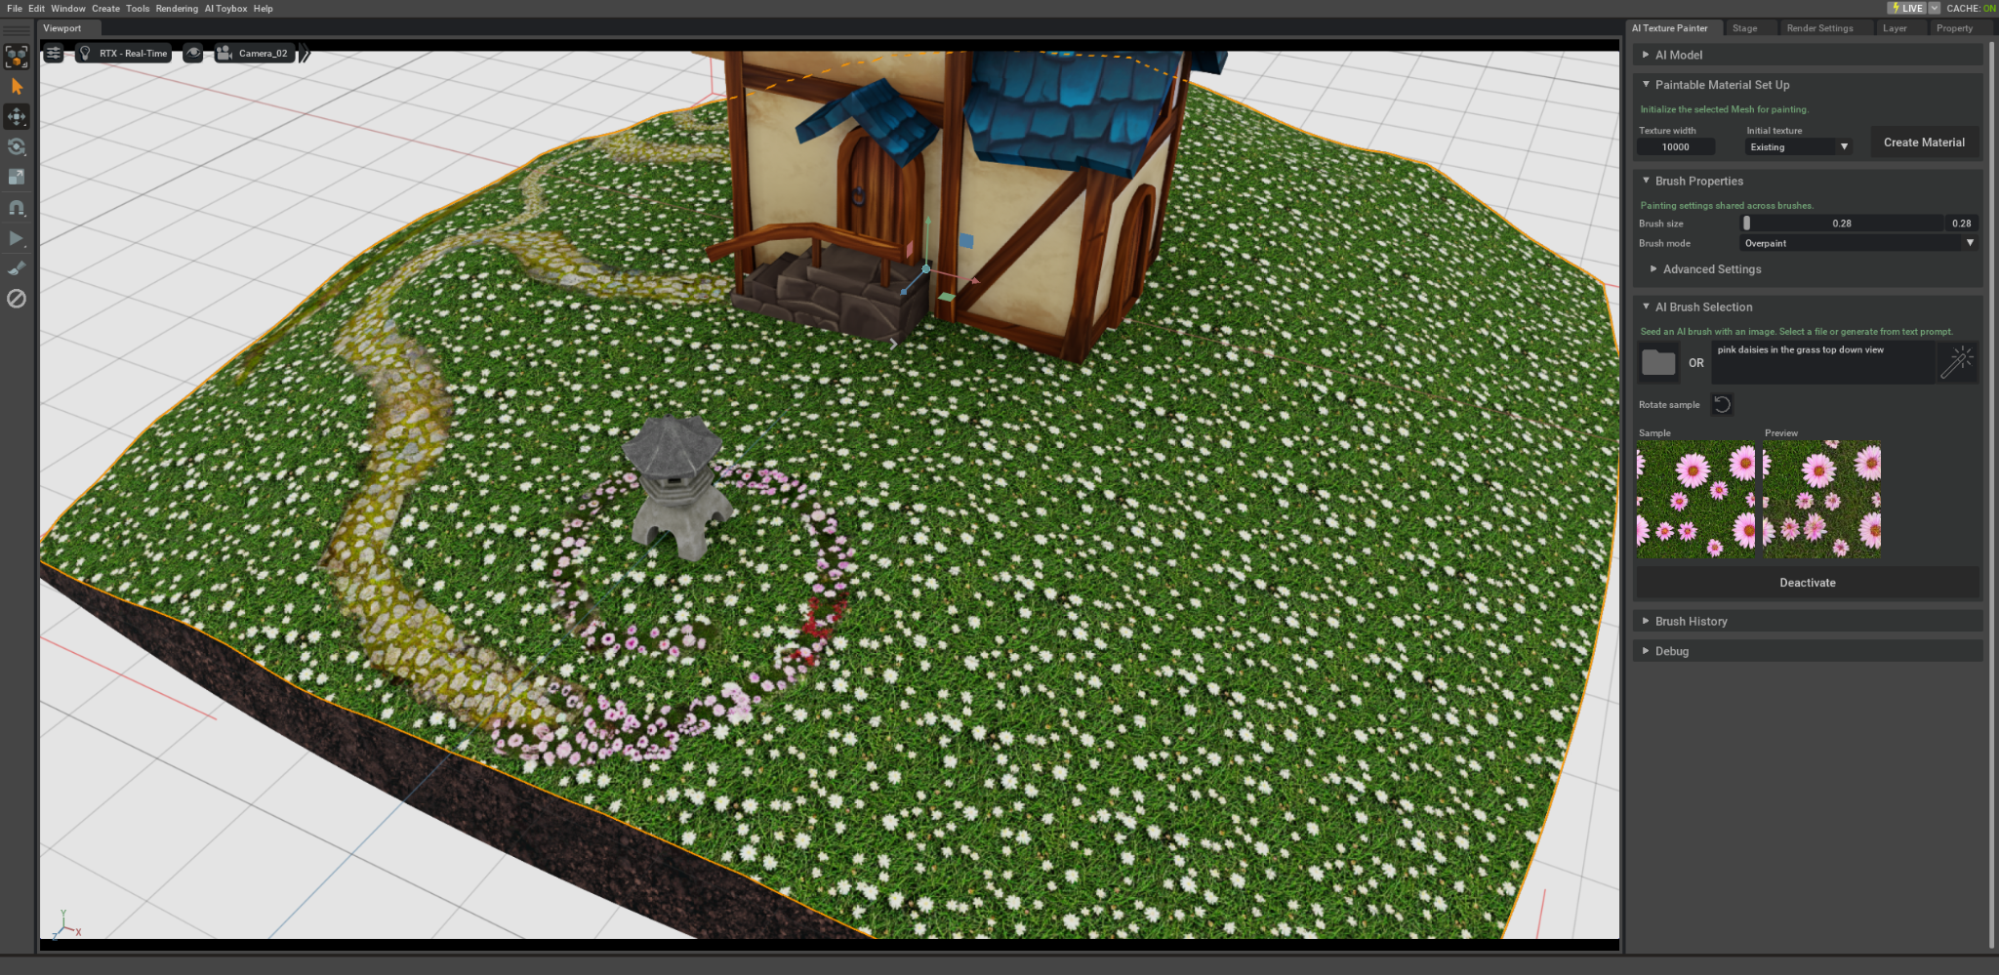 NVIDIA Omniverse interface showing a scene with a grass meadow and a pagoda. A windy stone path goes through the meadow and transitions to the pink daisies path seamlessly.